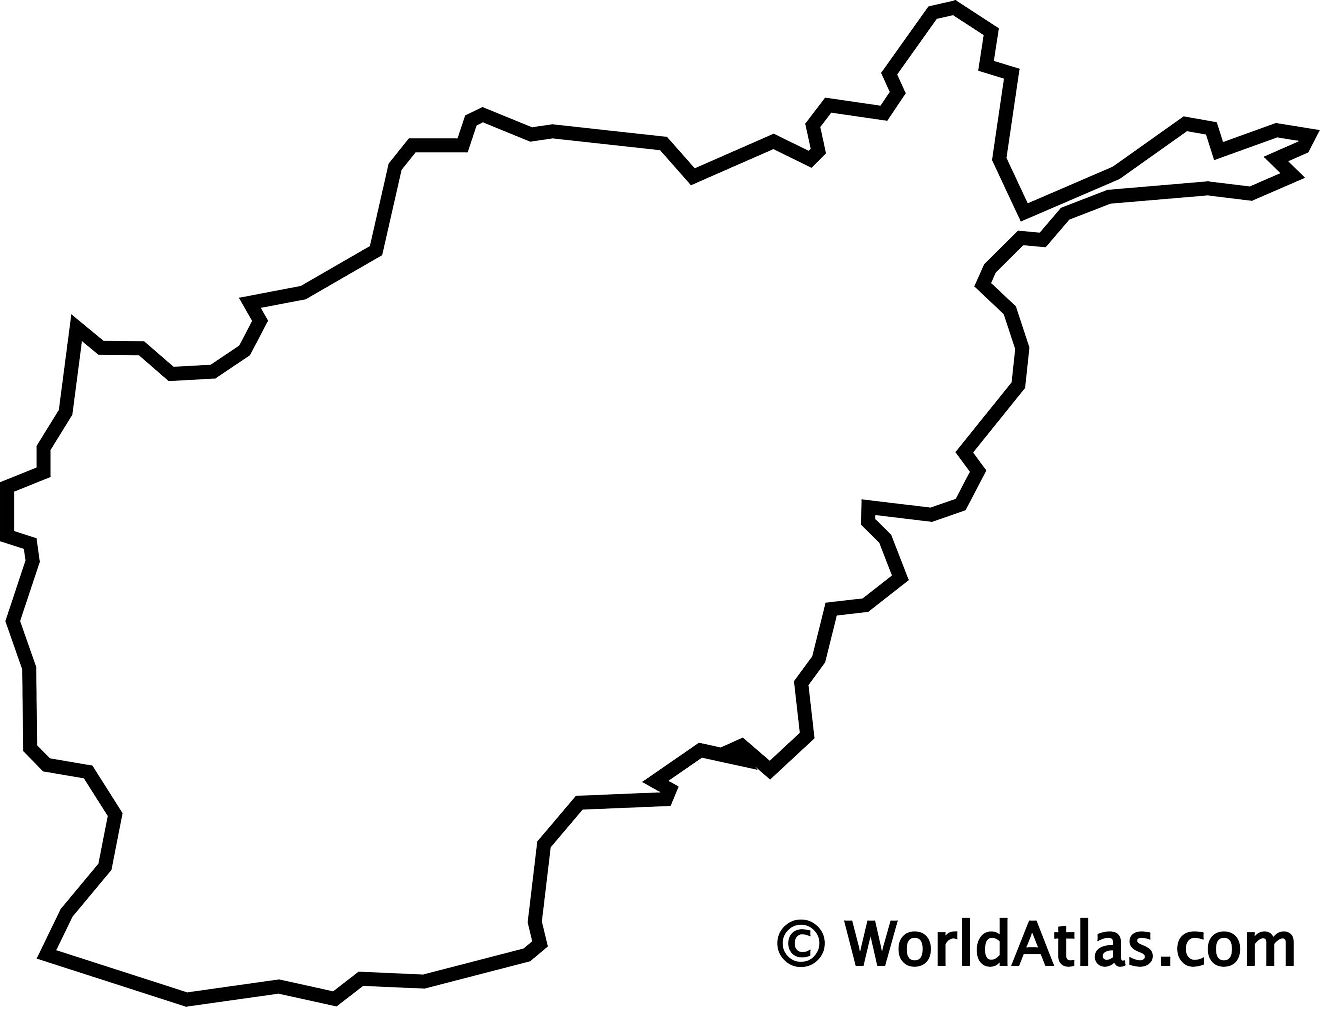 Afghanistan Maps And Facts World Atlas